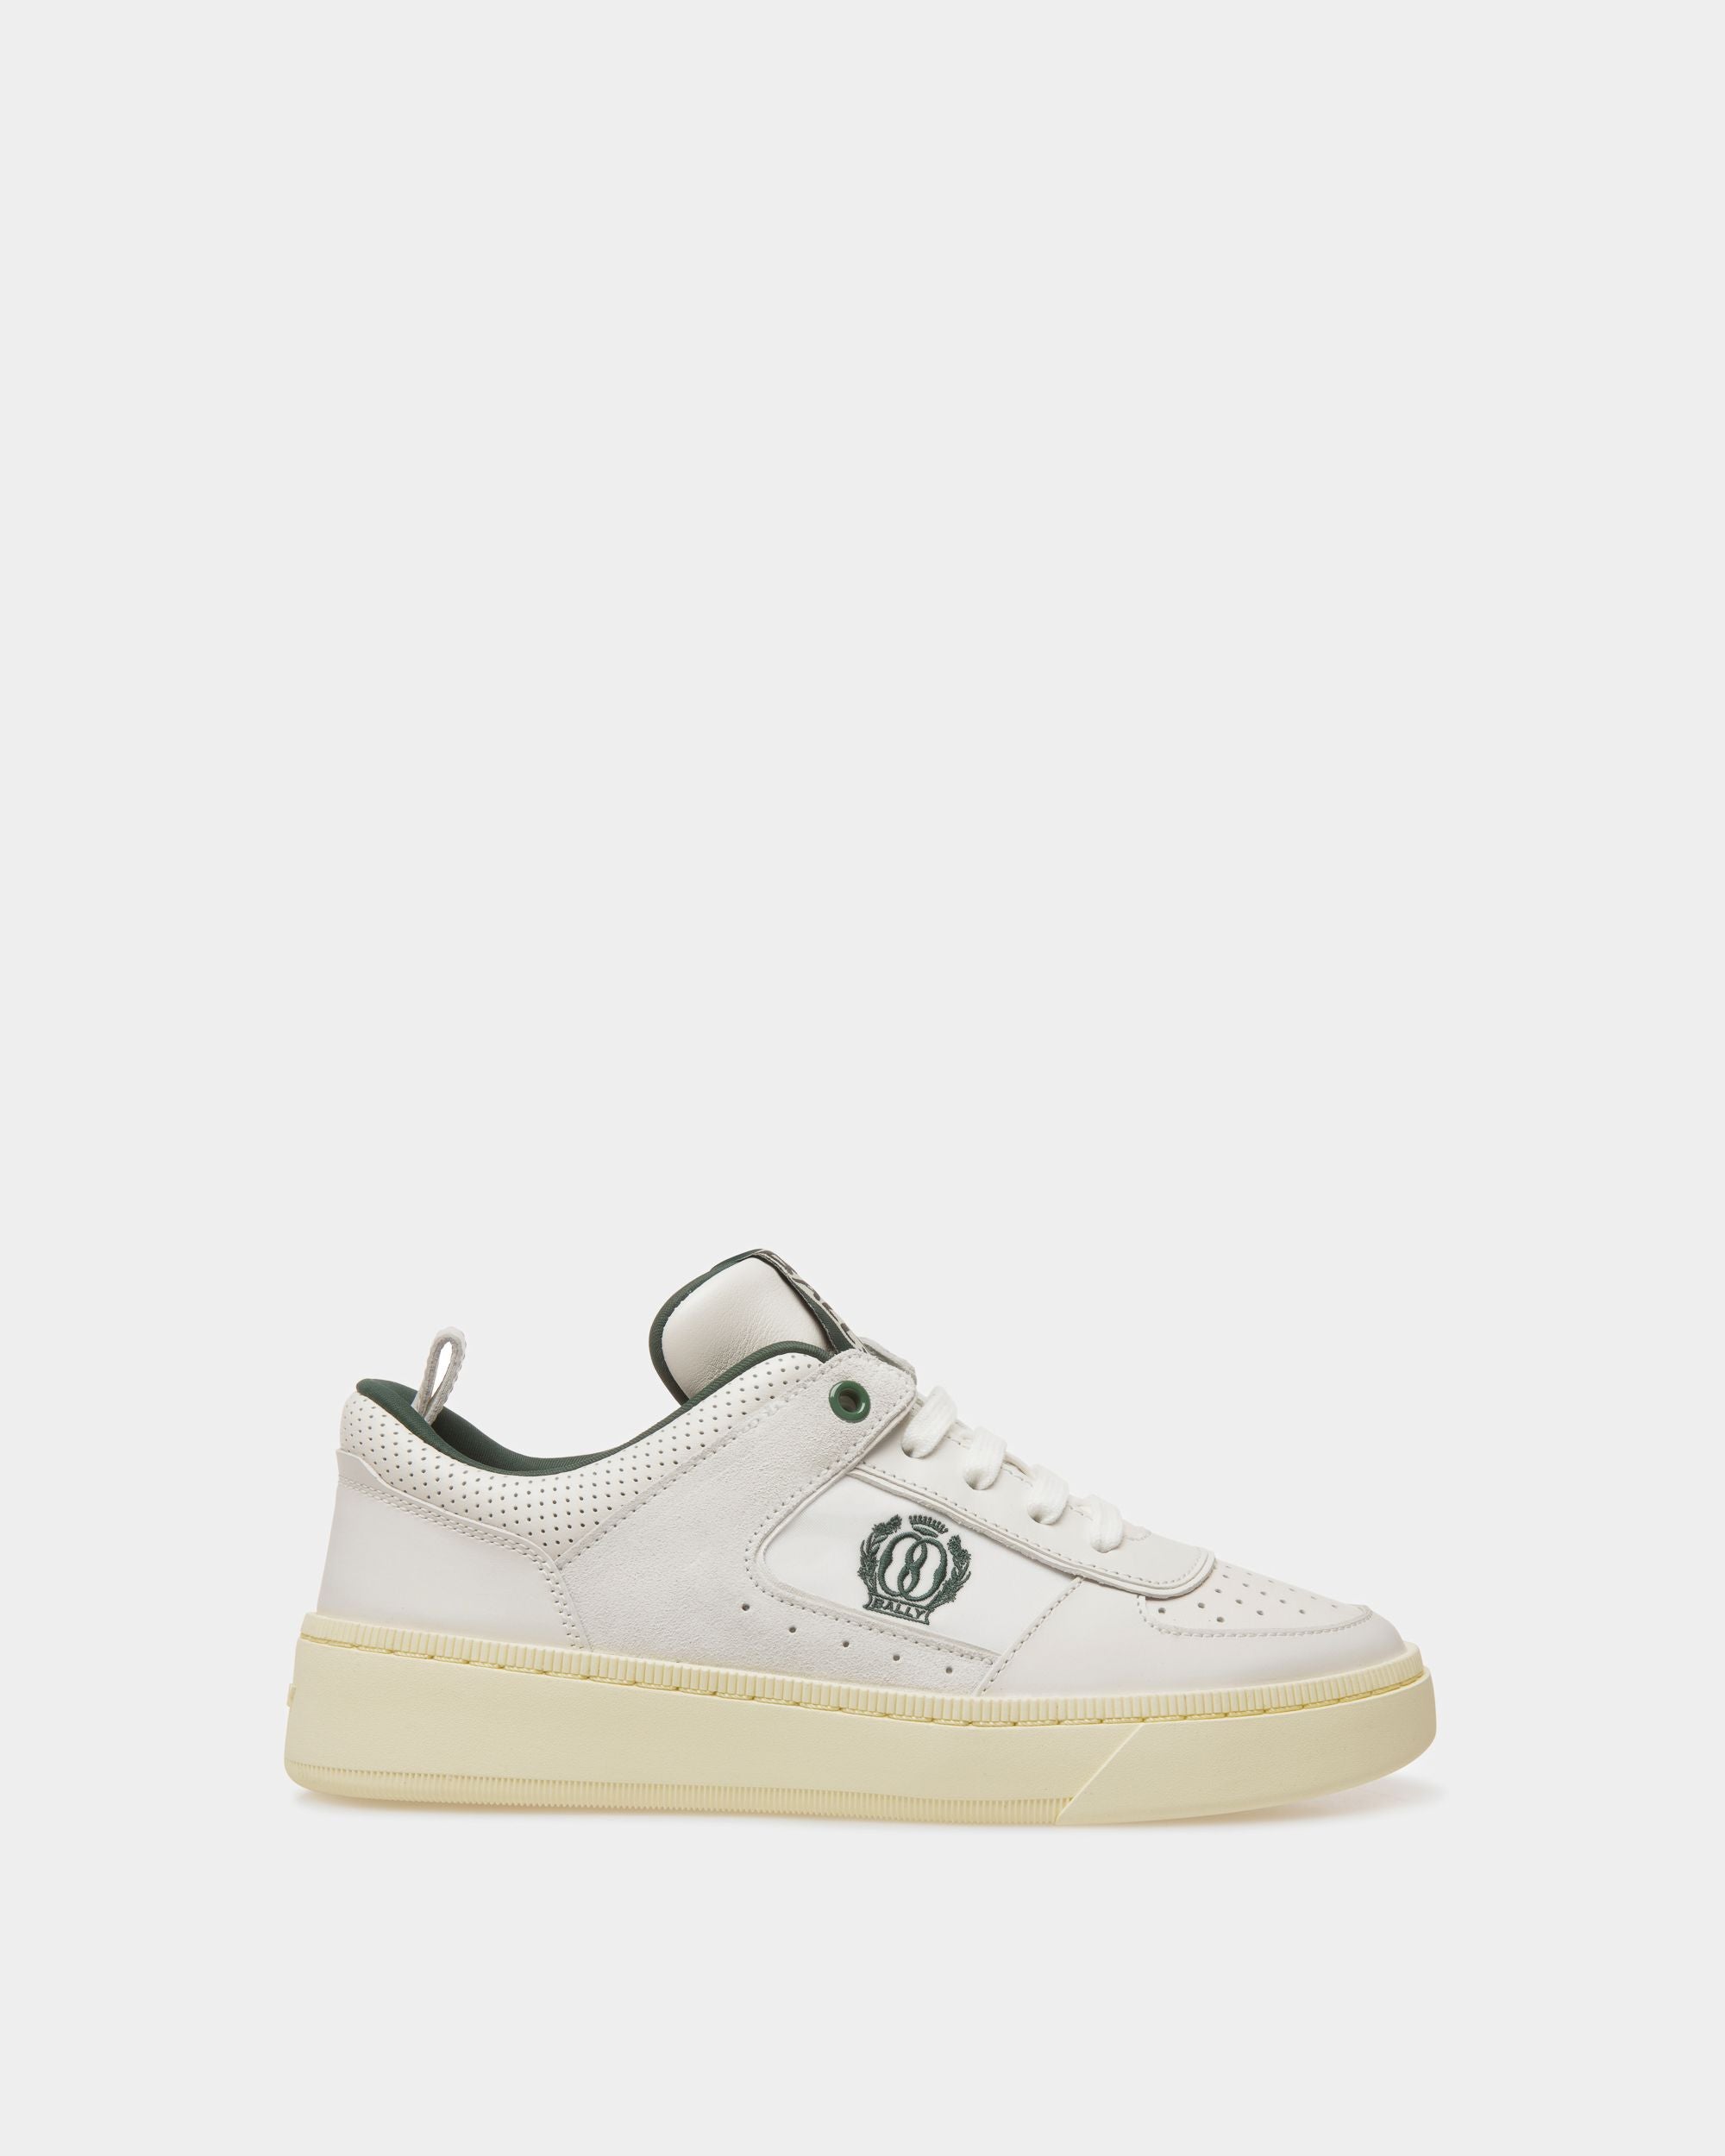 Riweira | Women's Sneakers | White And Green Leather | Bally | Still Life Side